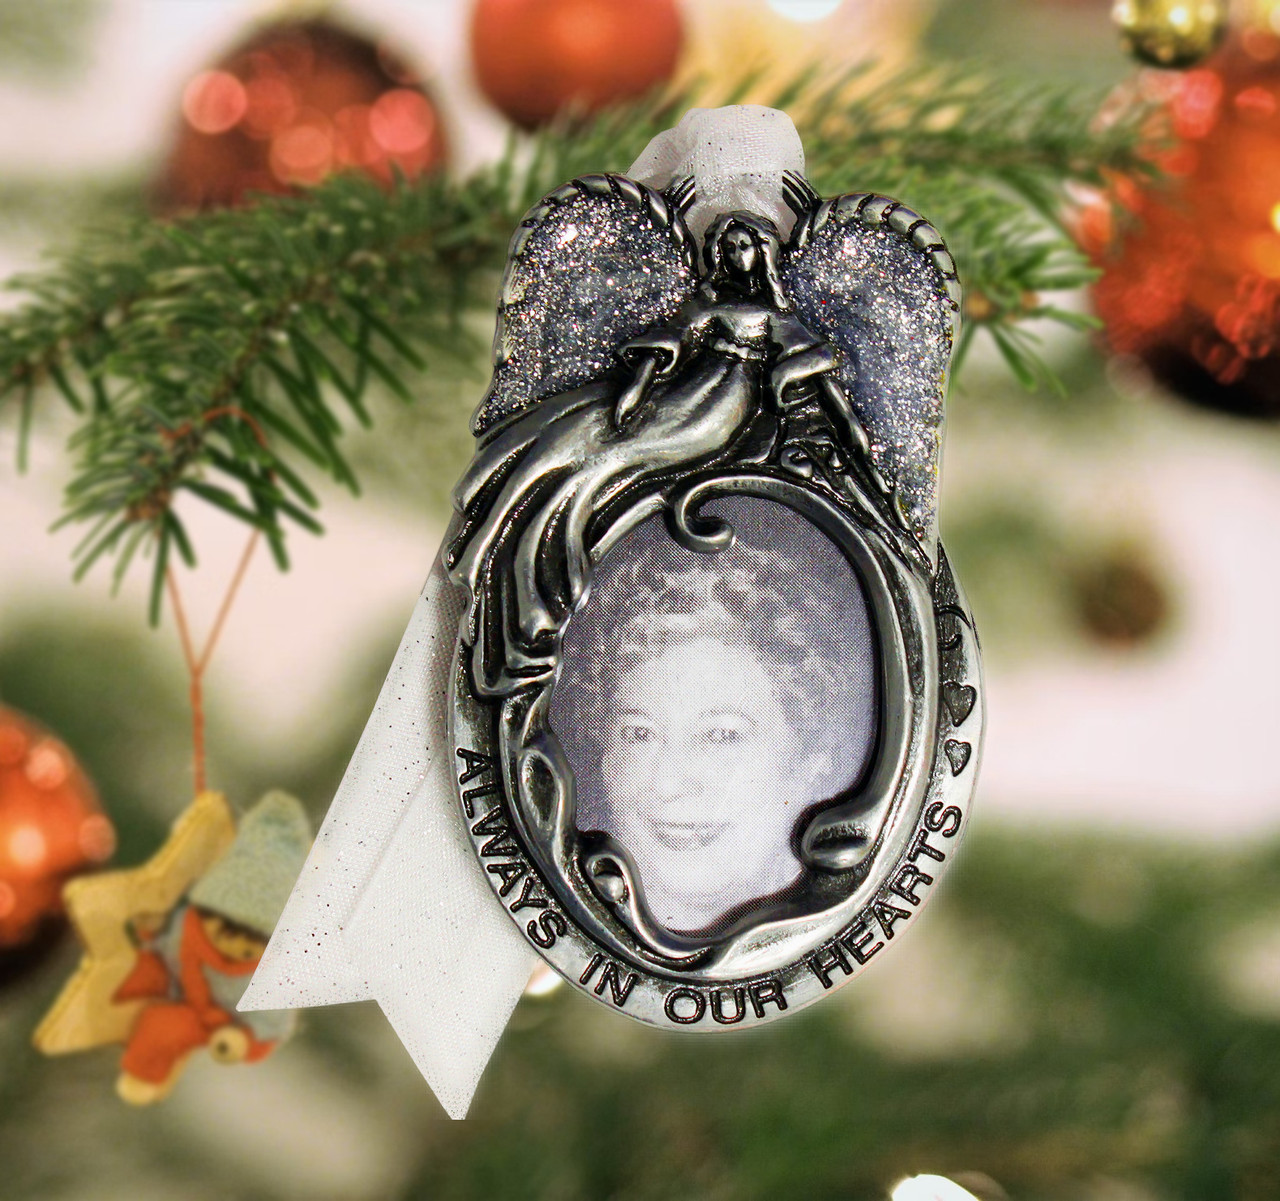 Personalised Angel Wings Ornament - thoughtfuldiycreations Gifts